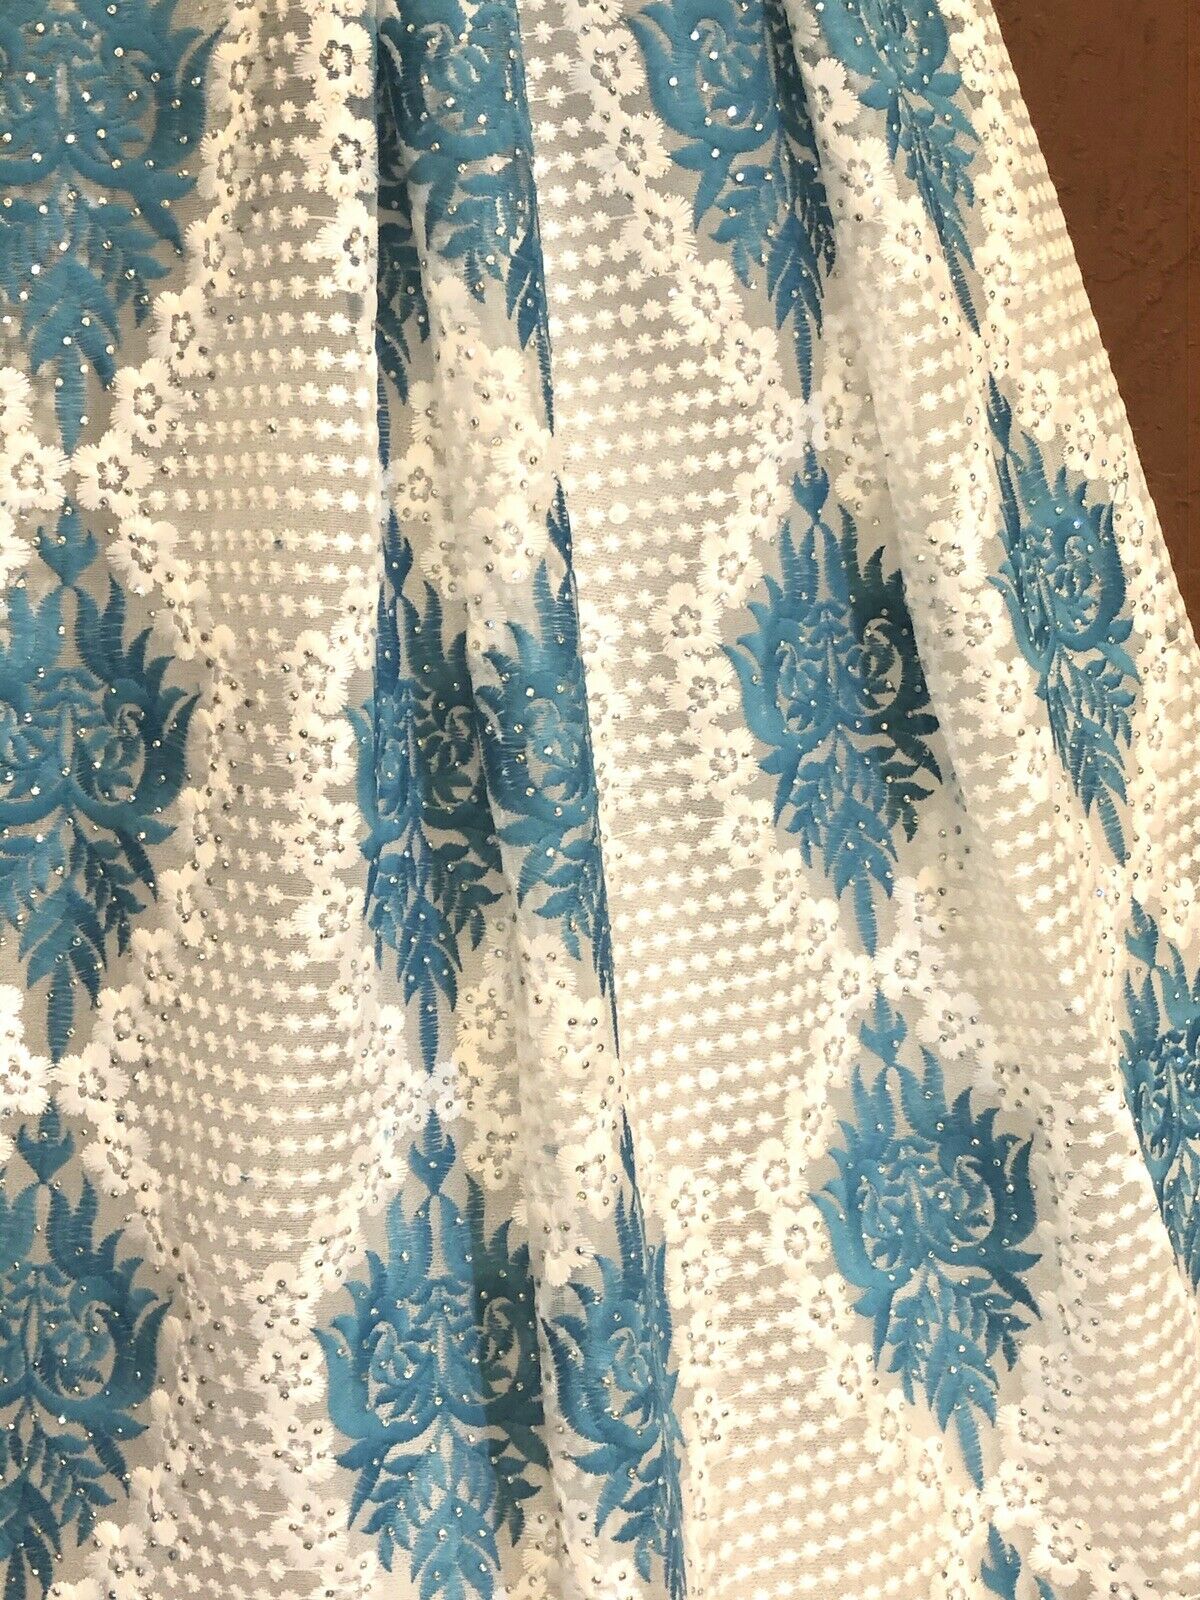 Teal and White Embroidered Sparkly Lace Fabric